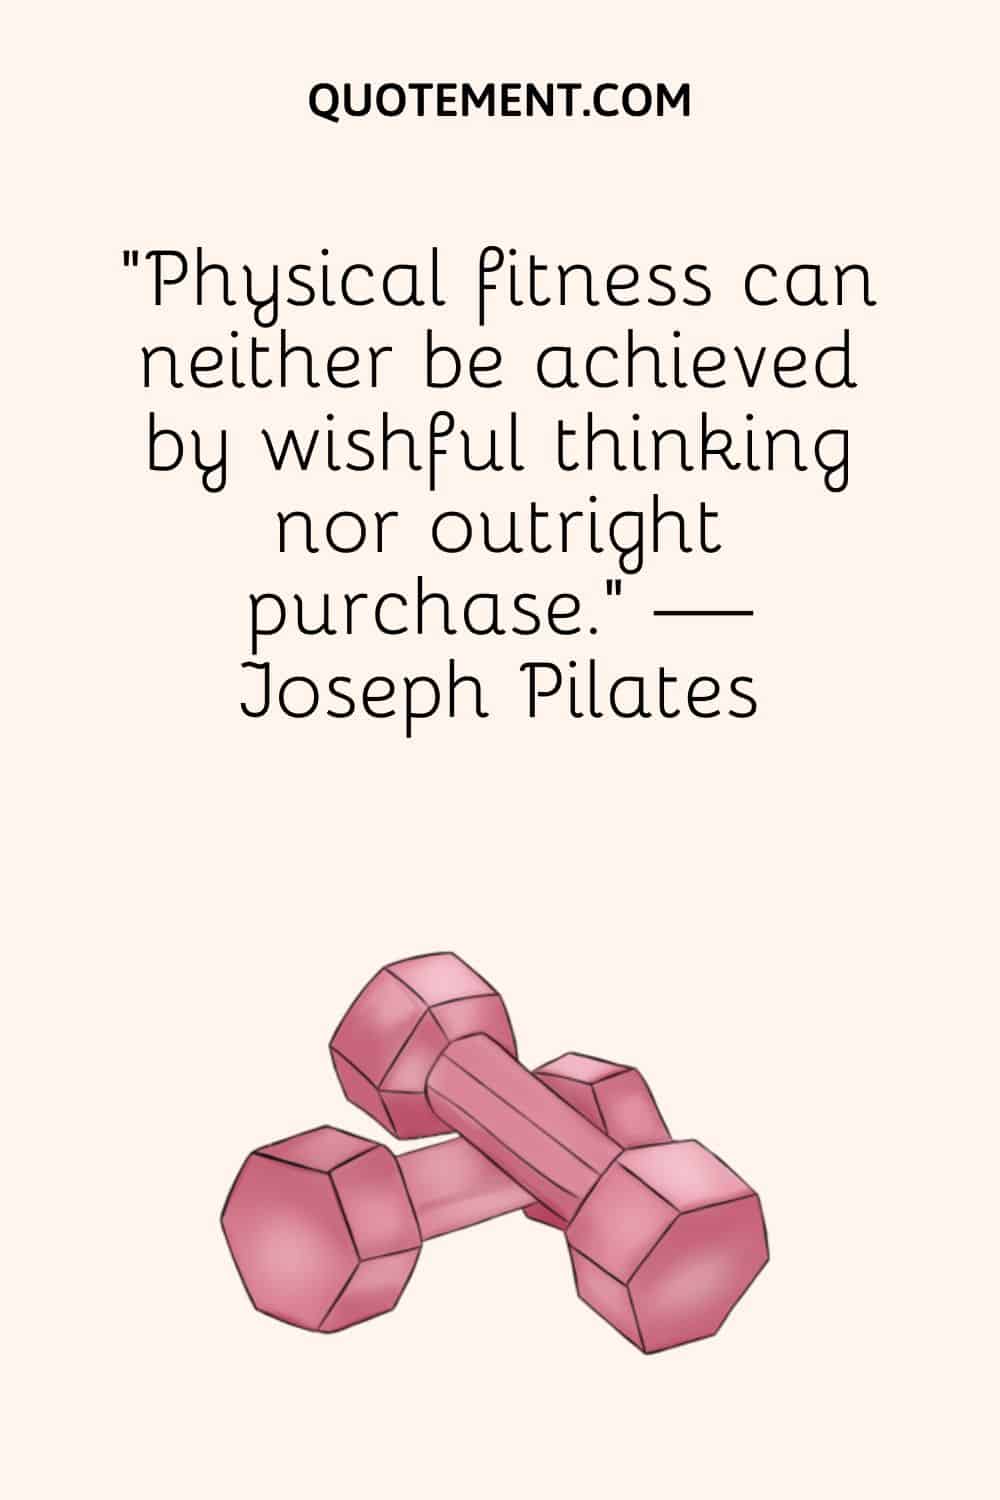 image of pink dumbbells representing fitness motivational quote